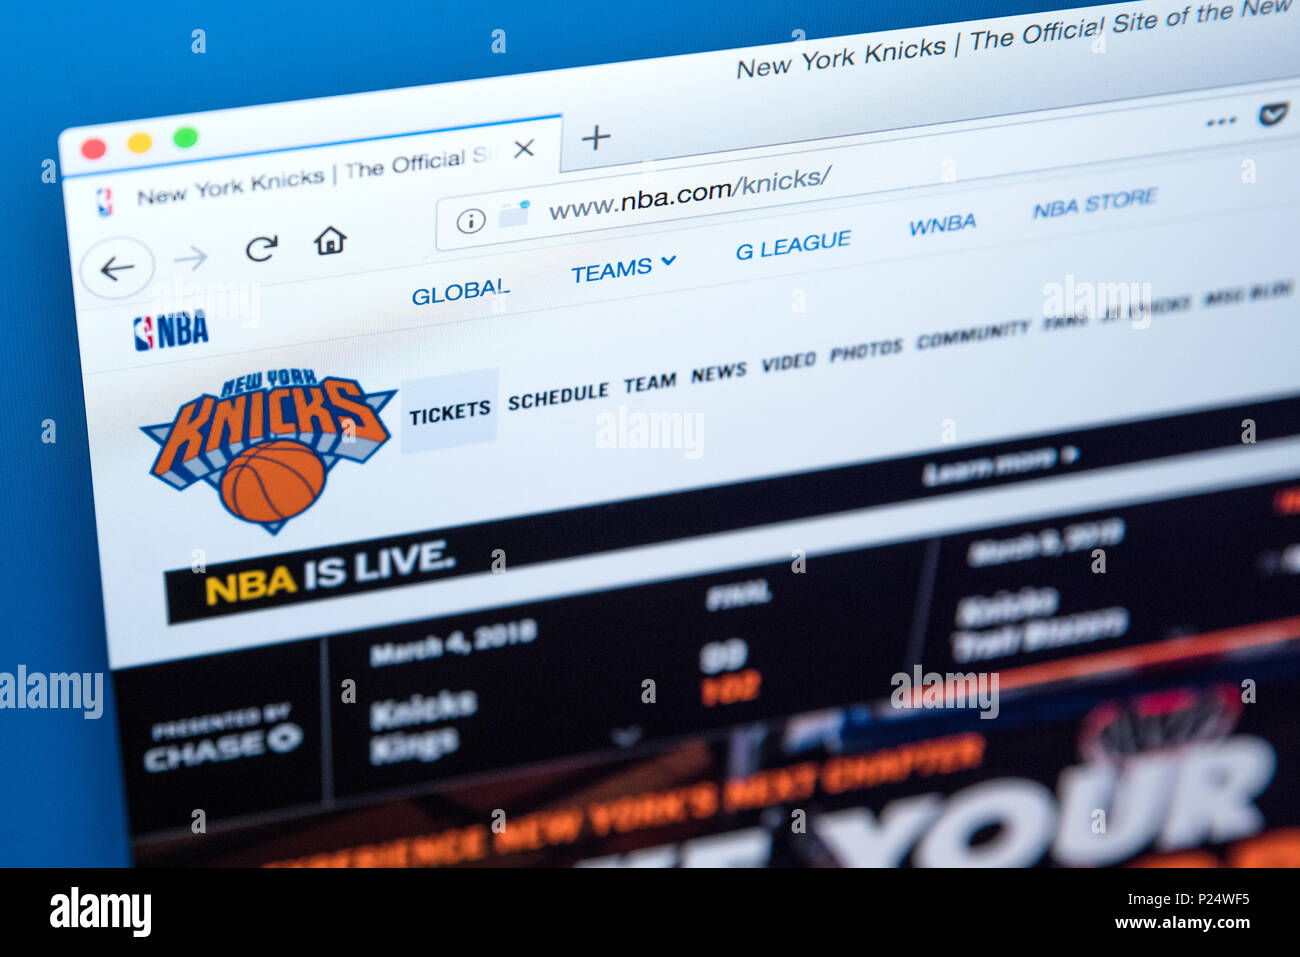 https://c8.alamy.com/comp/P24WF5/london-uk-march-5th-2018-the-homepage-of-the-official-website-for-the-new-york-knicks-the-american-professional-basketball-team-on-5th-march-20-P24WF5.jpg